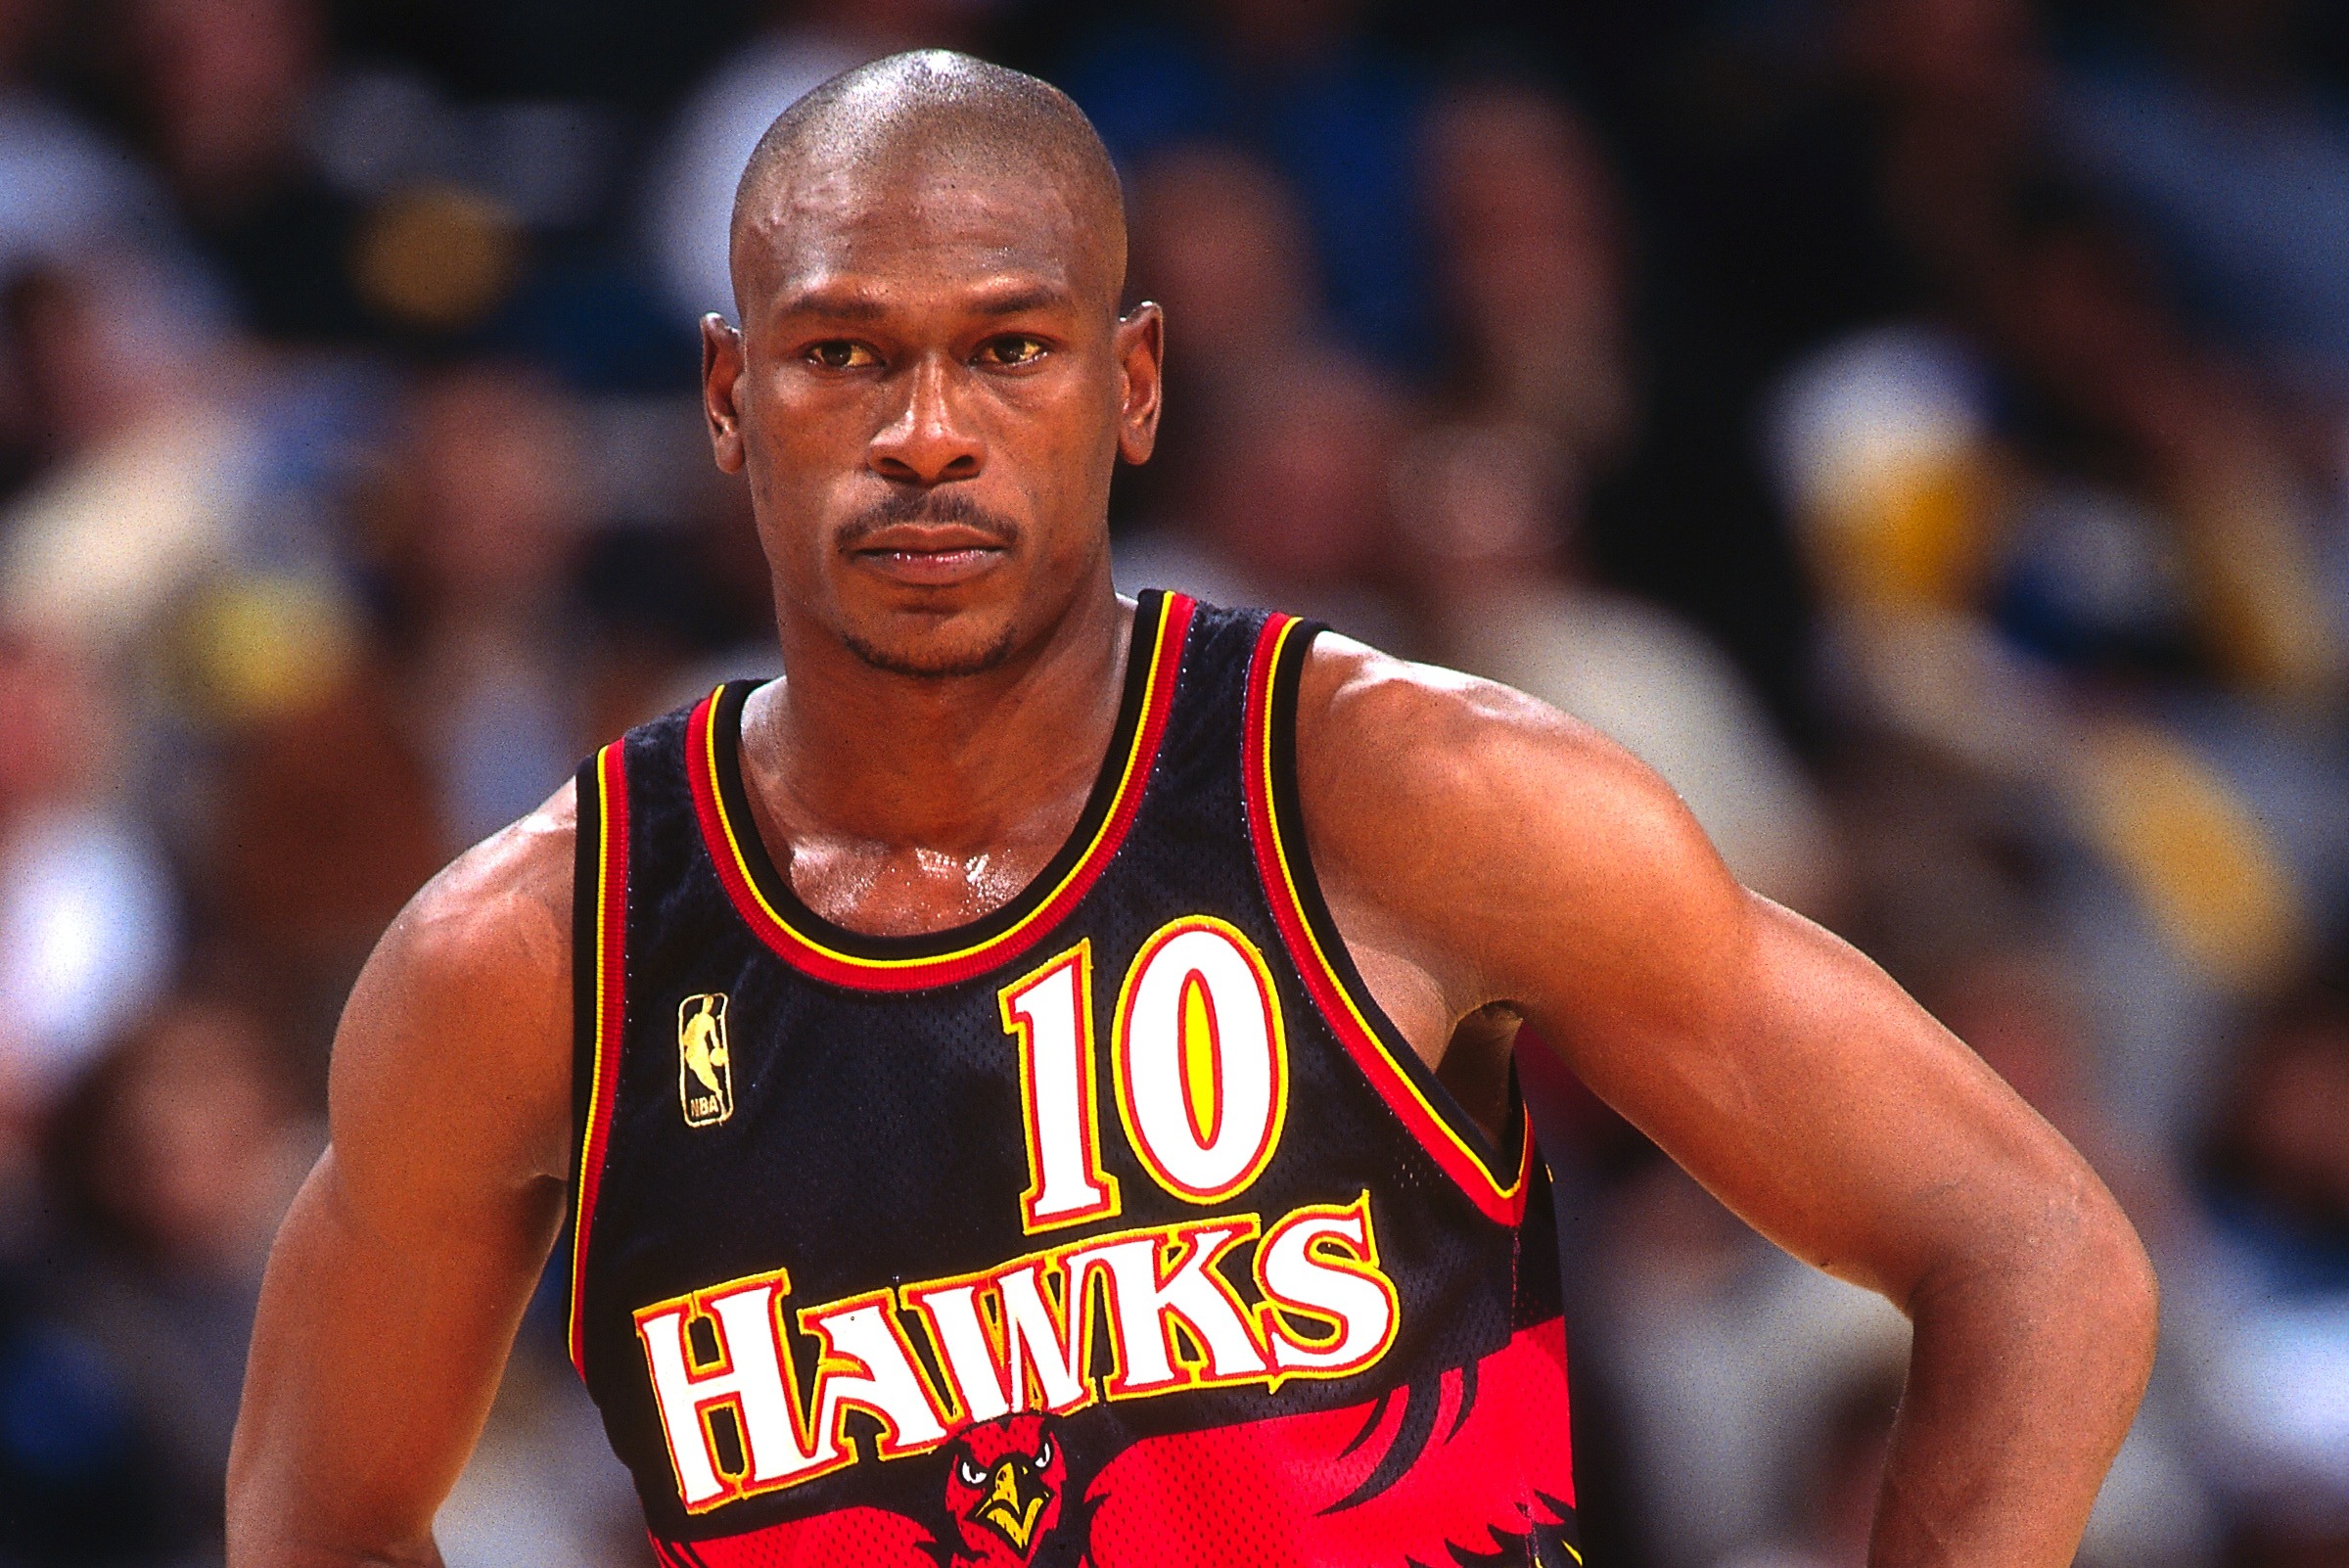 Mookie Blaylock Reportedly on Life Support Following Car Accident